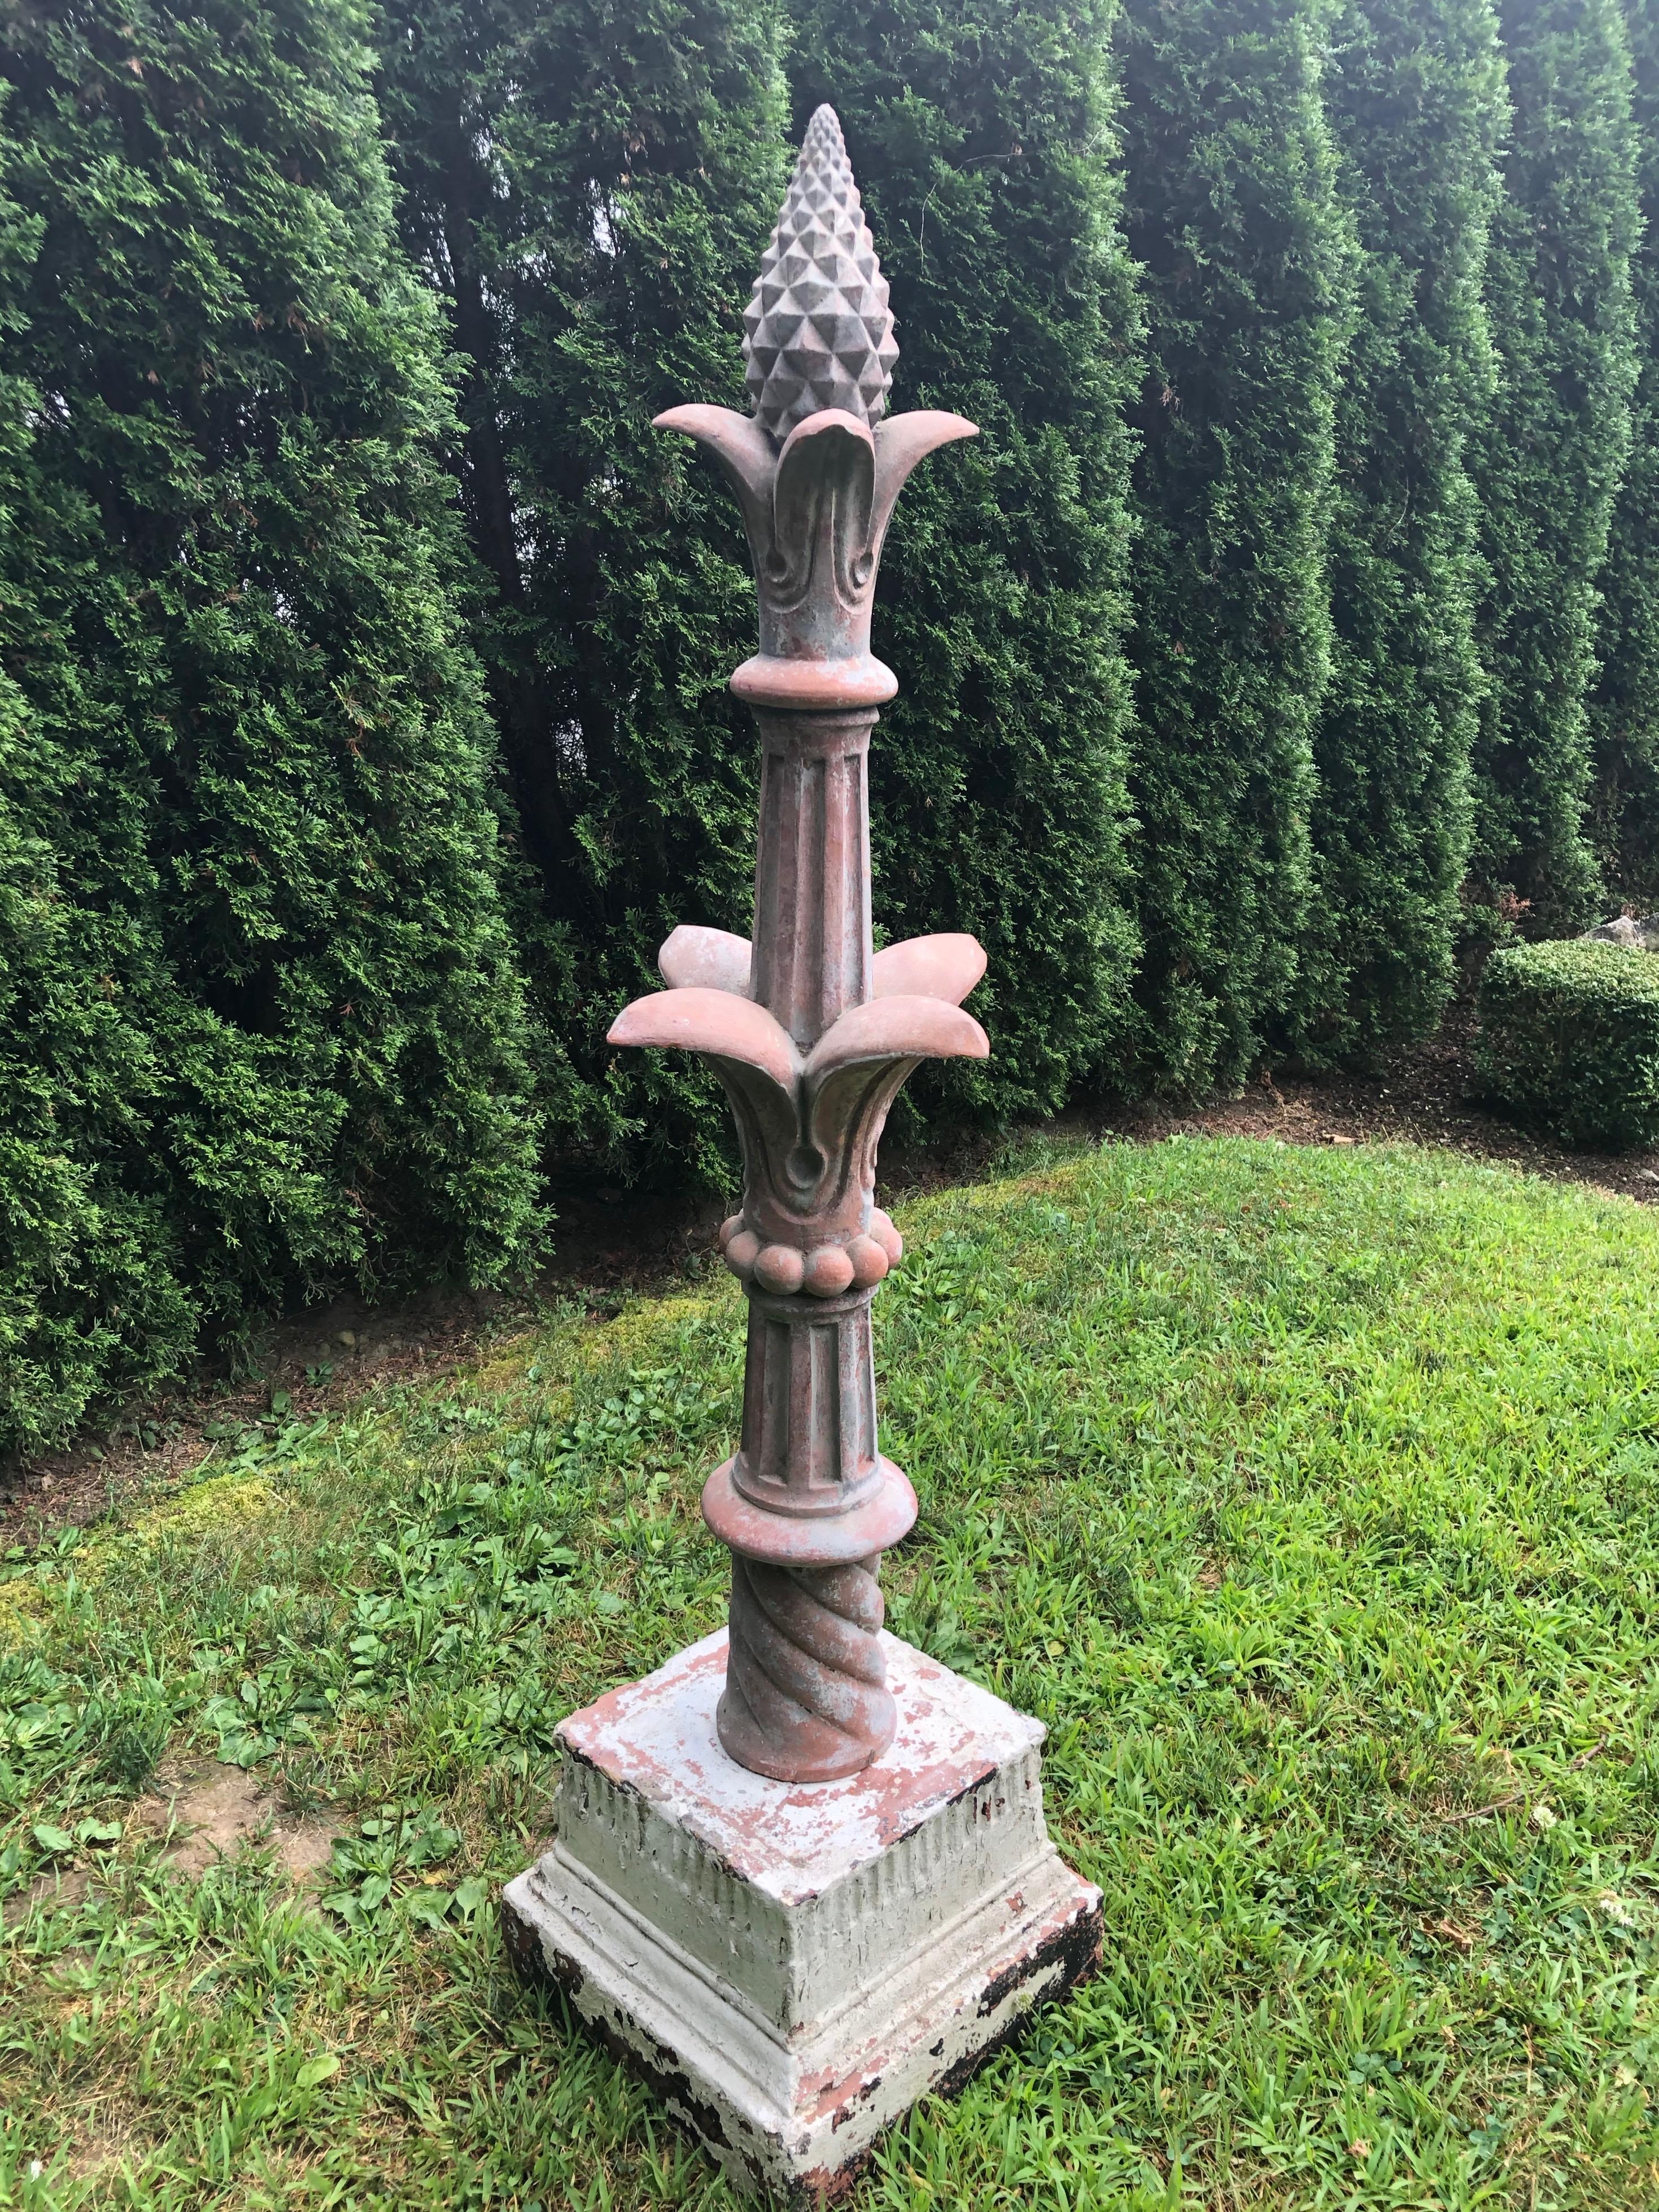 We’ve never seen any finial this tall, let alone such a stunning French one with 2 fleurs-de-lys and a detailed pineapple-form top. The beaded decoration near the bottom, combined with the fluted upright sections and barley-twist motif (near the